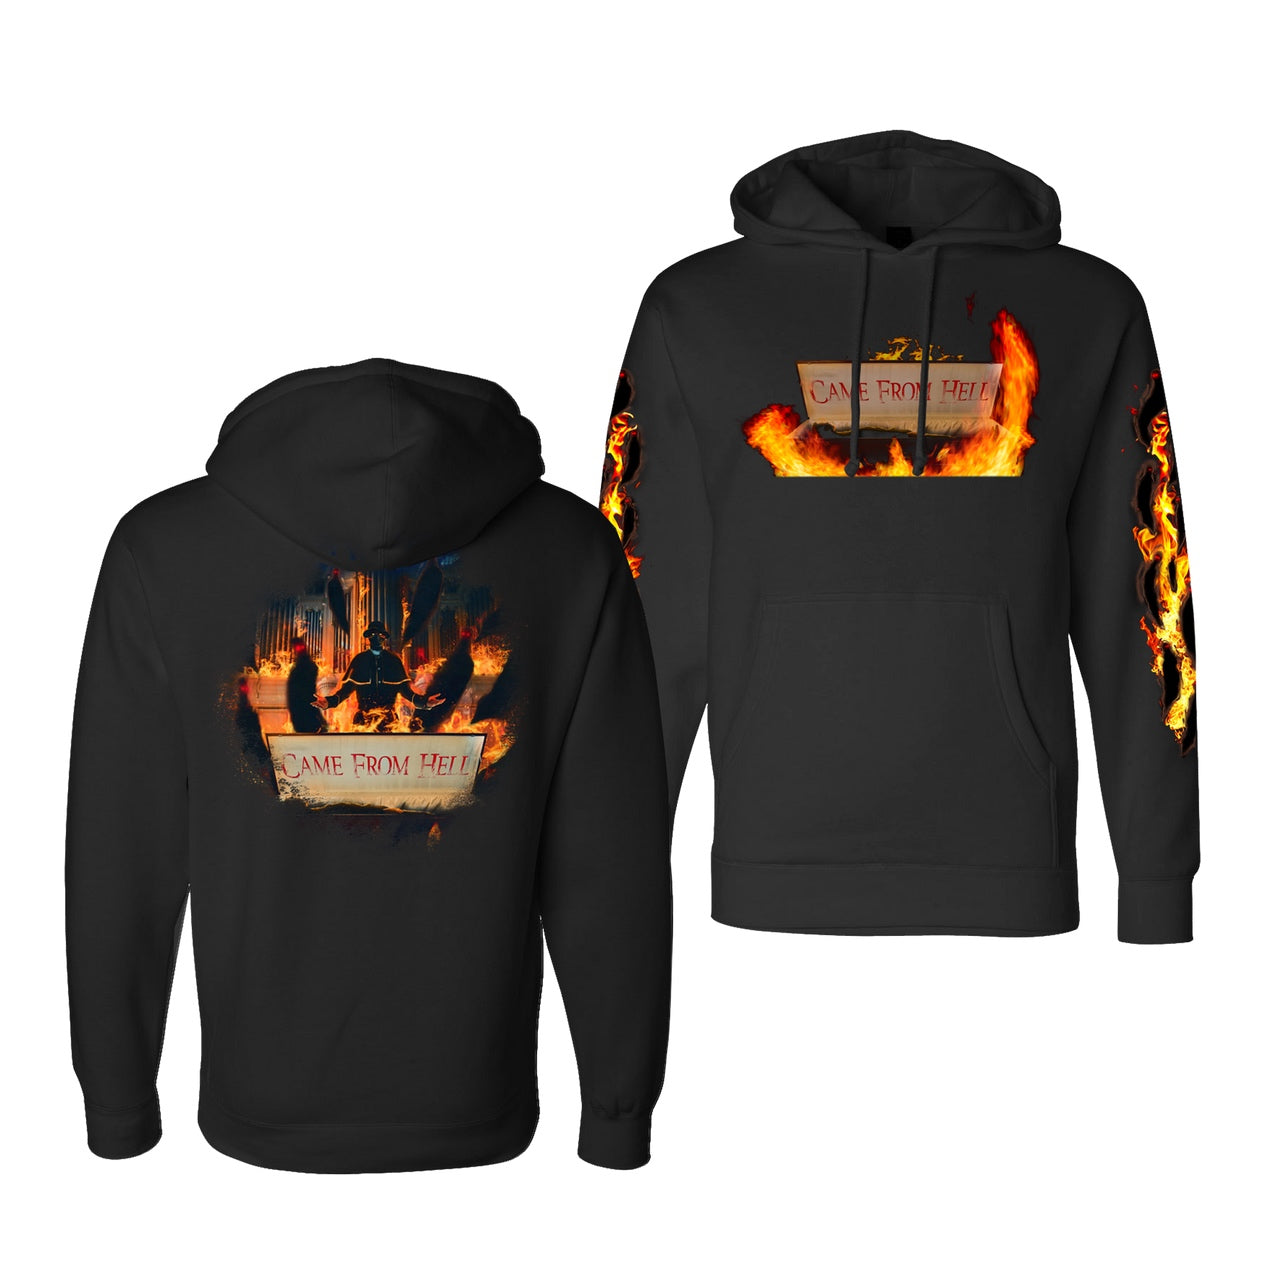 GRAVEDGR - CAME FROM HELL Hoodie